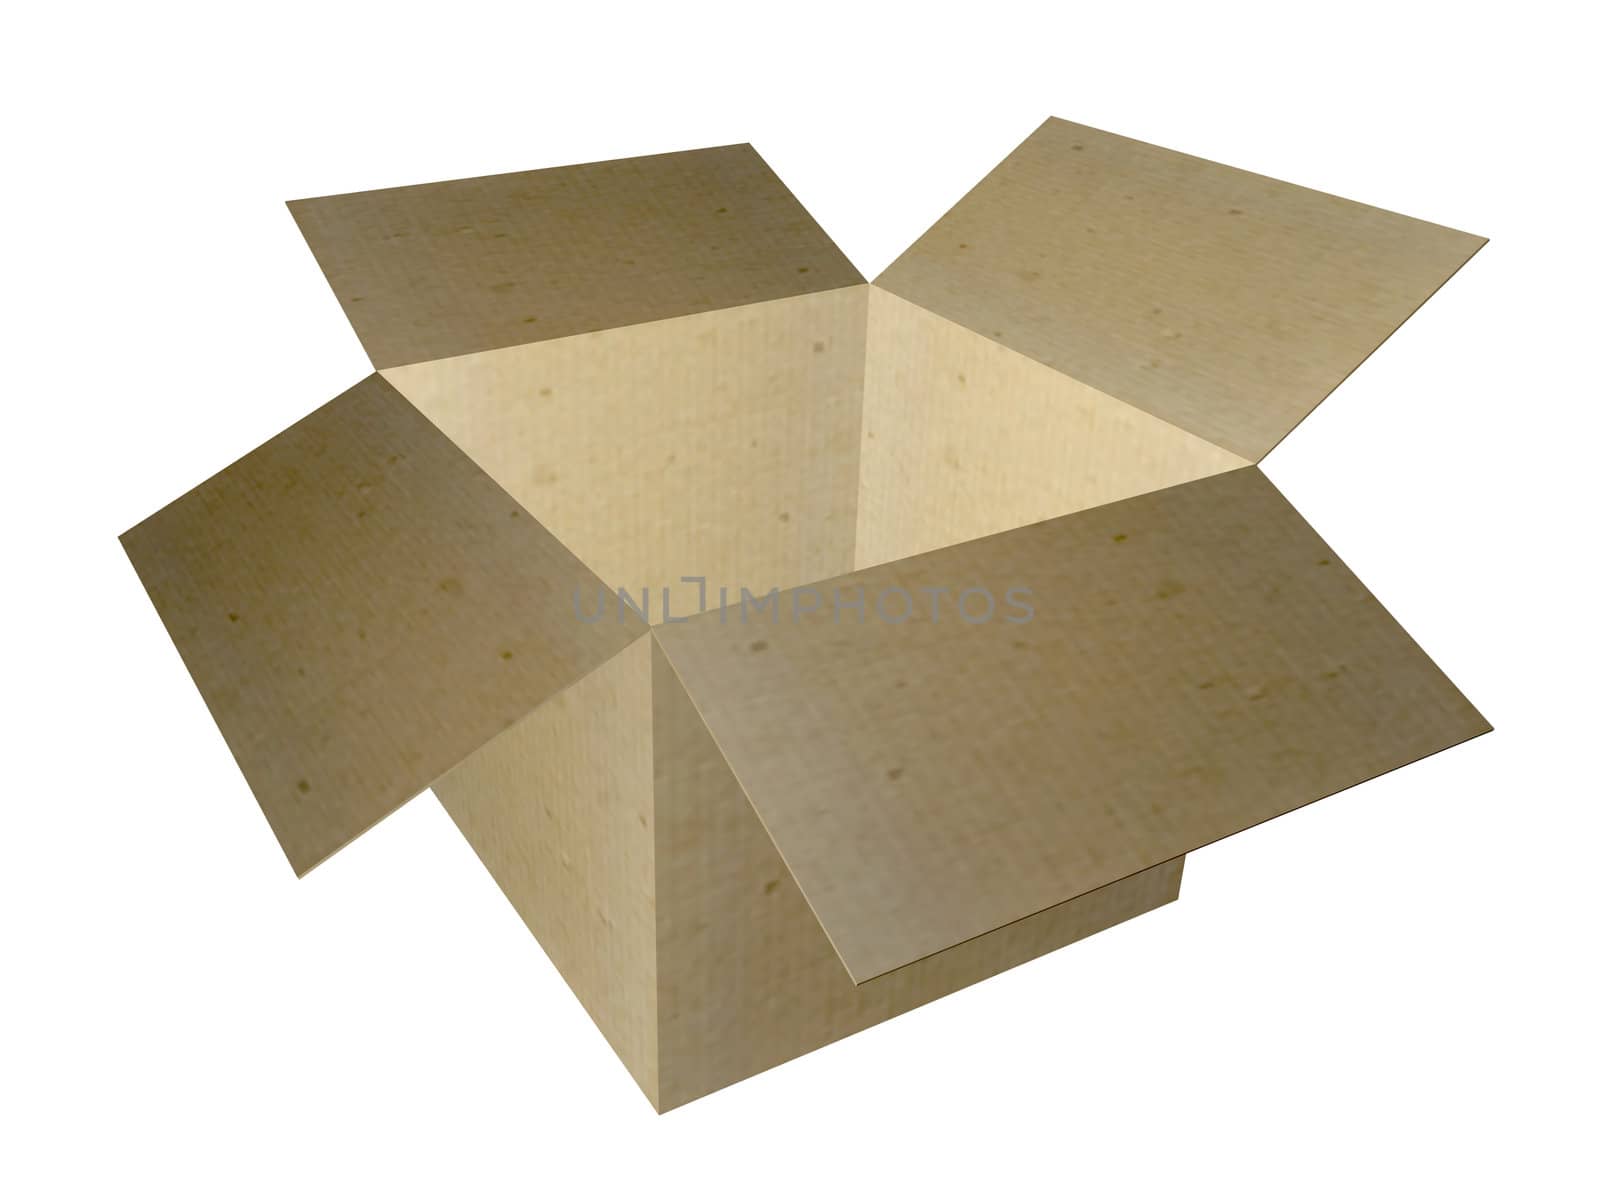 Cardboard Box with lid opened. Isolated on white background.